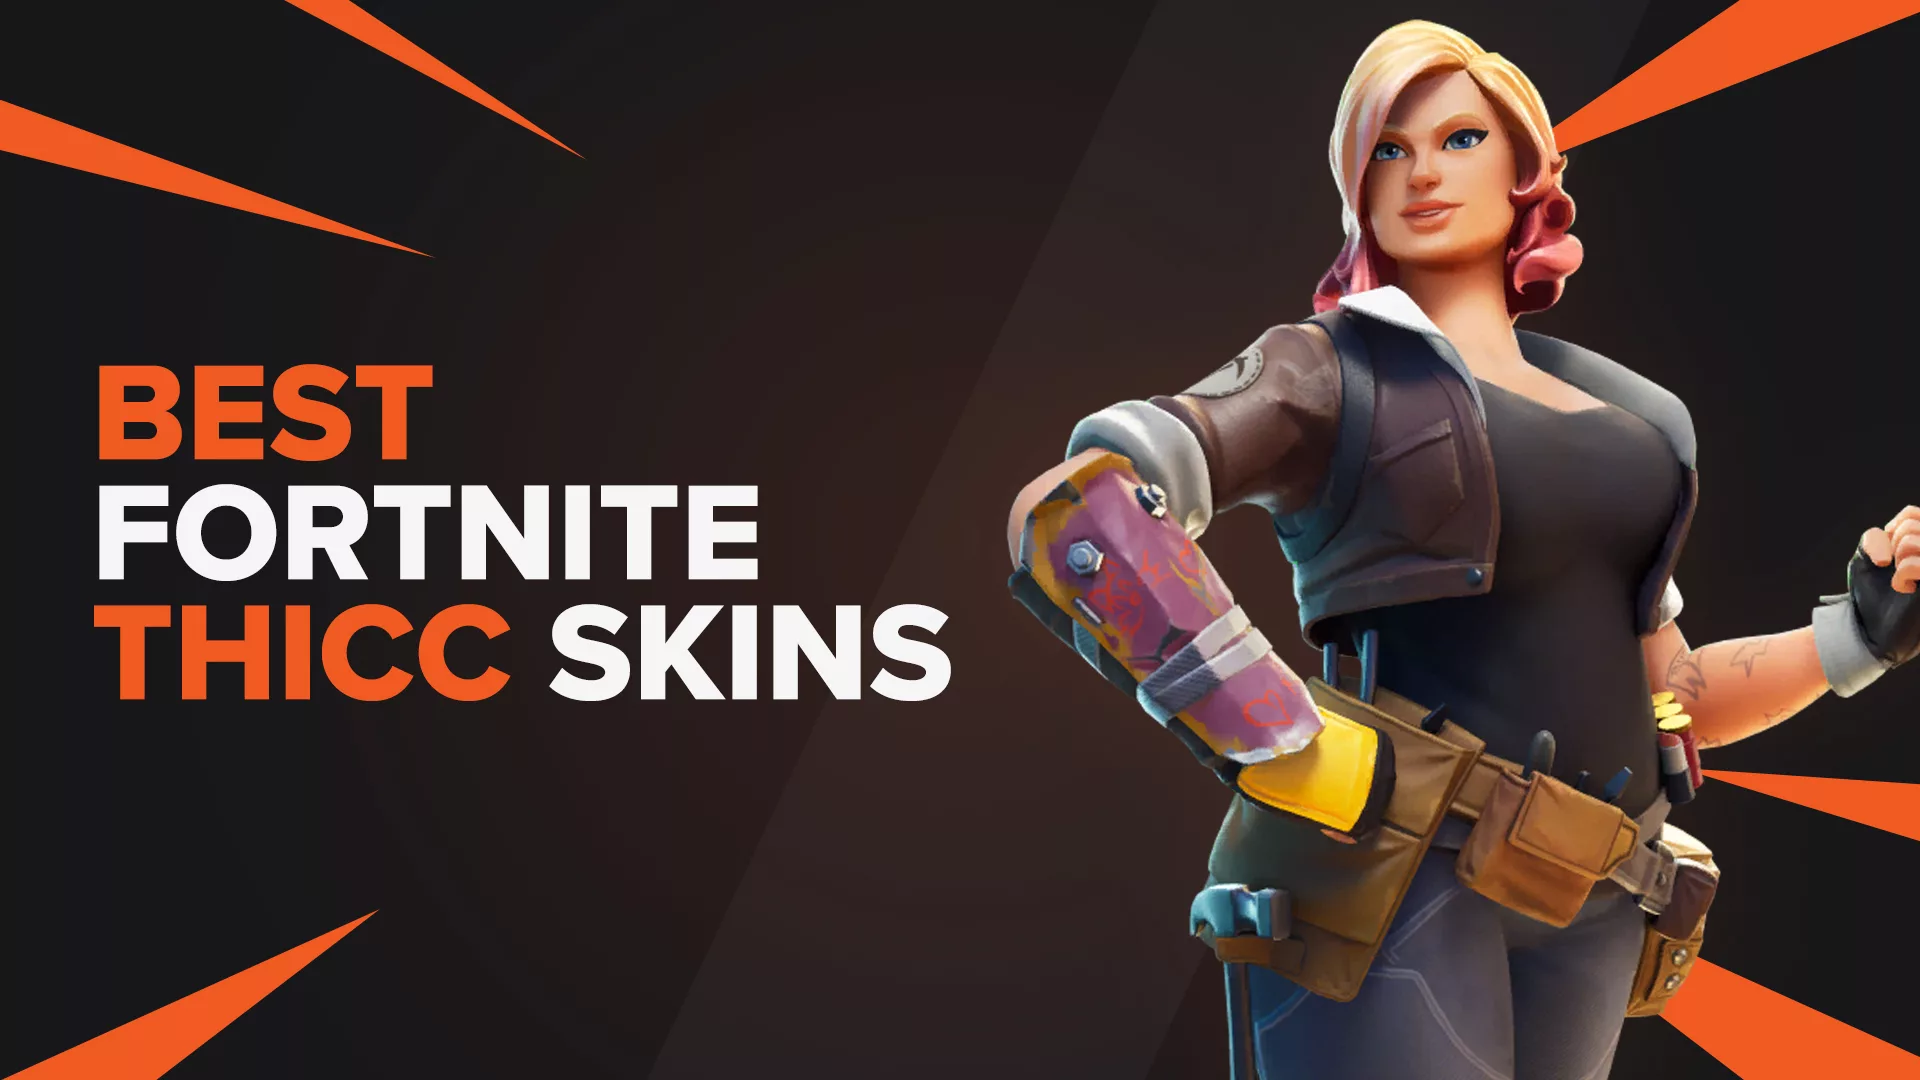 alkove padle Modstander These 4 Are The Thiccest Fortnite Skins Ever Released! | TGG